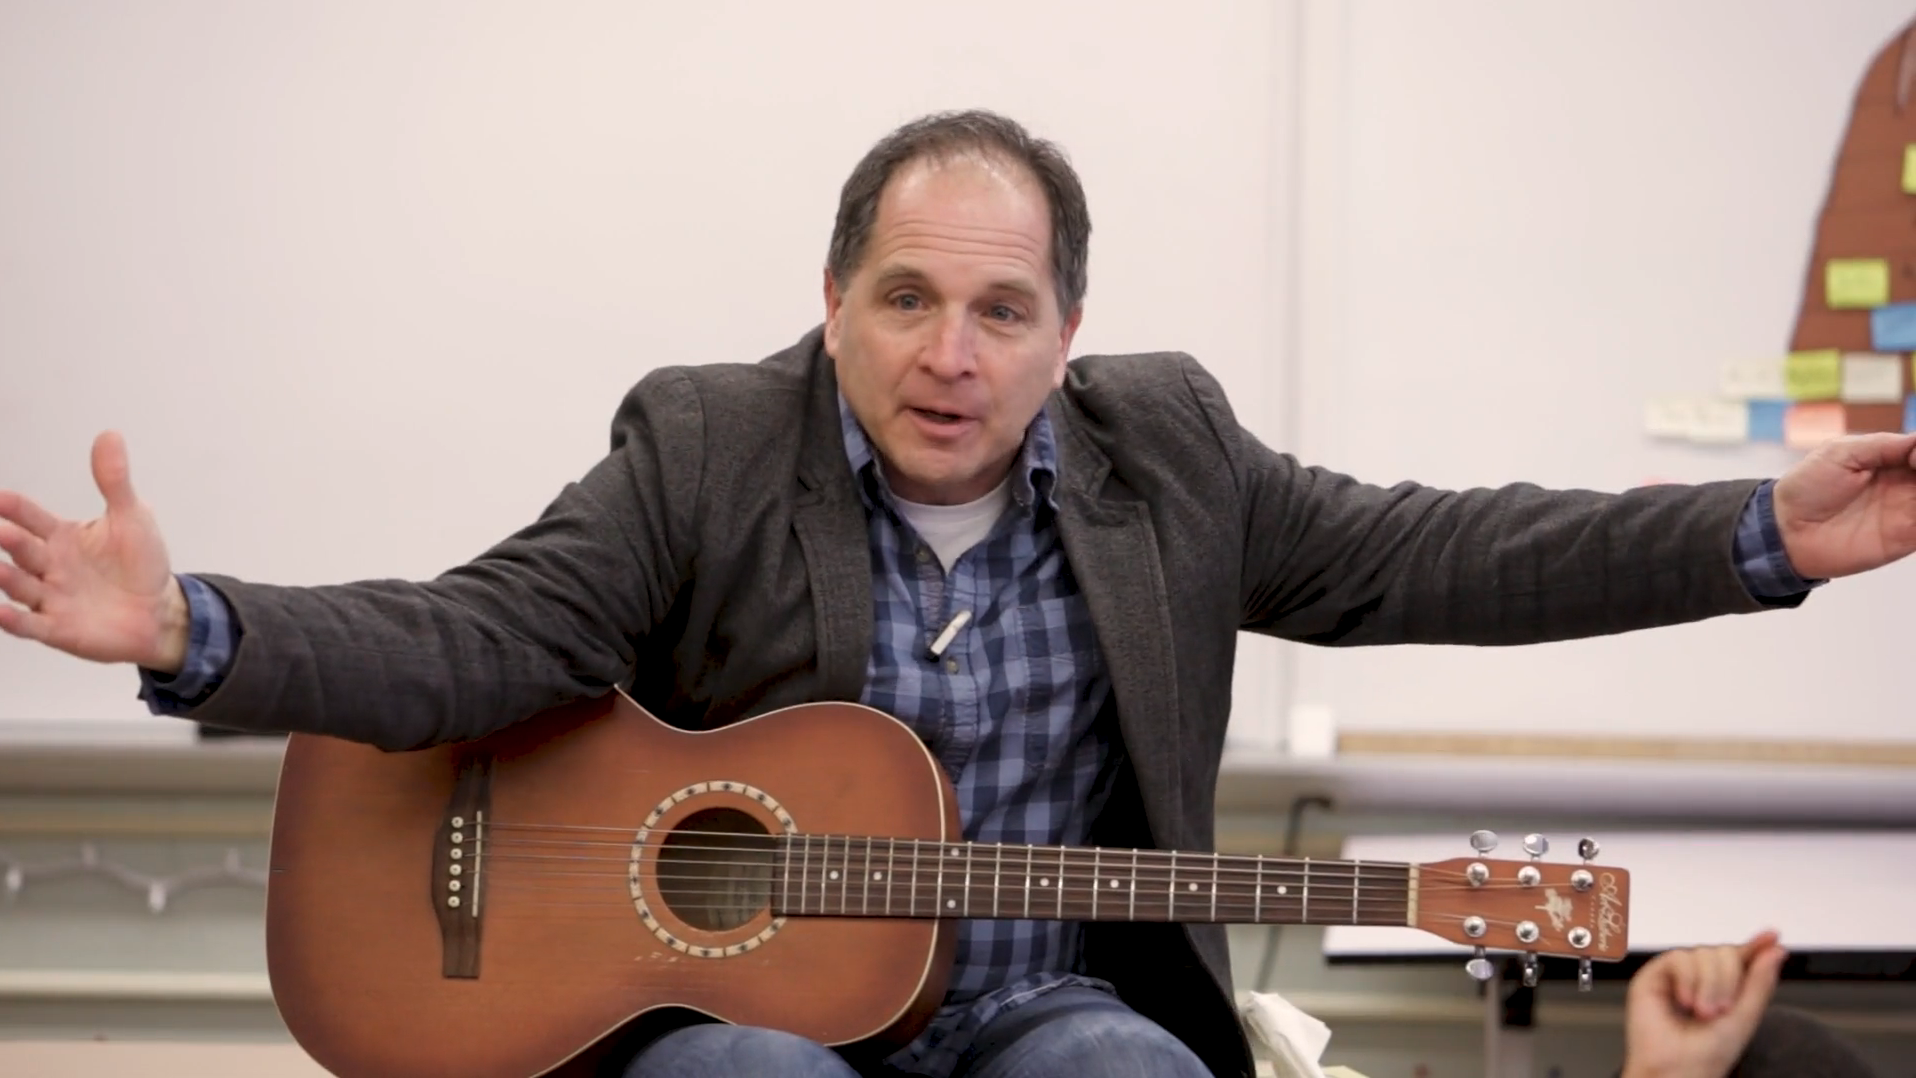 David Levine '84 gestures while holding his guitar